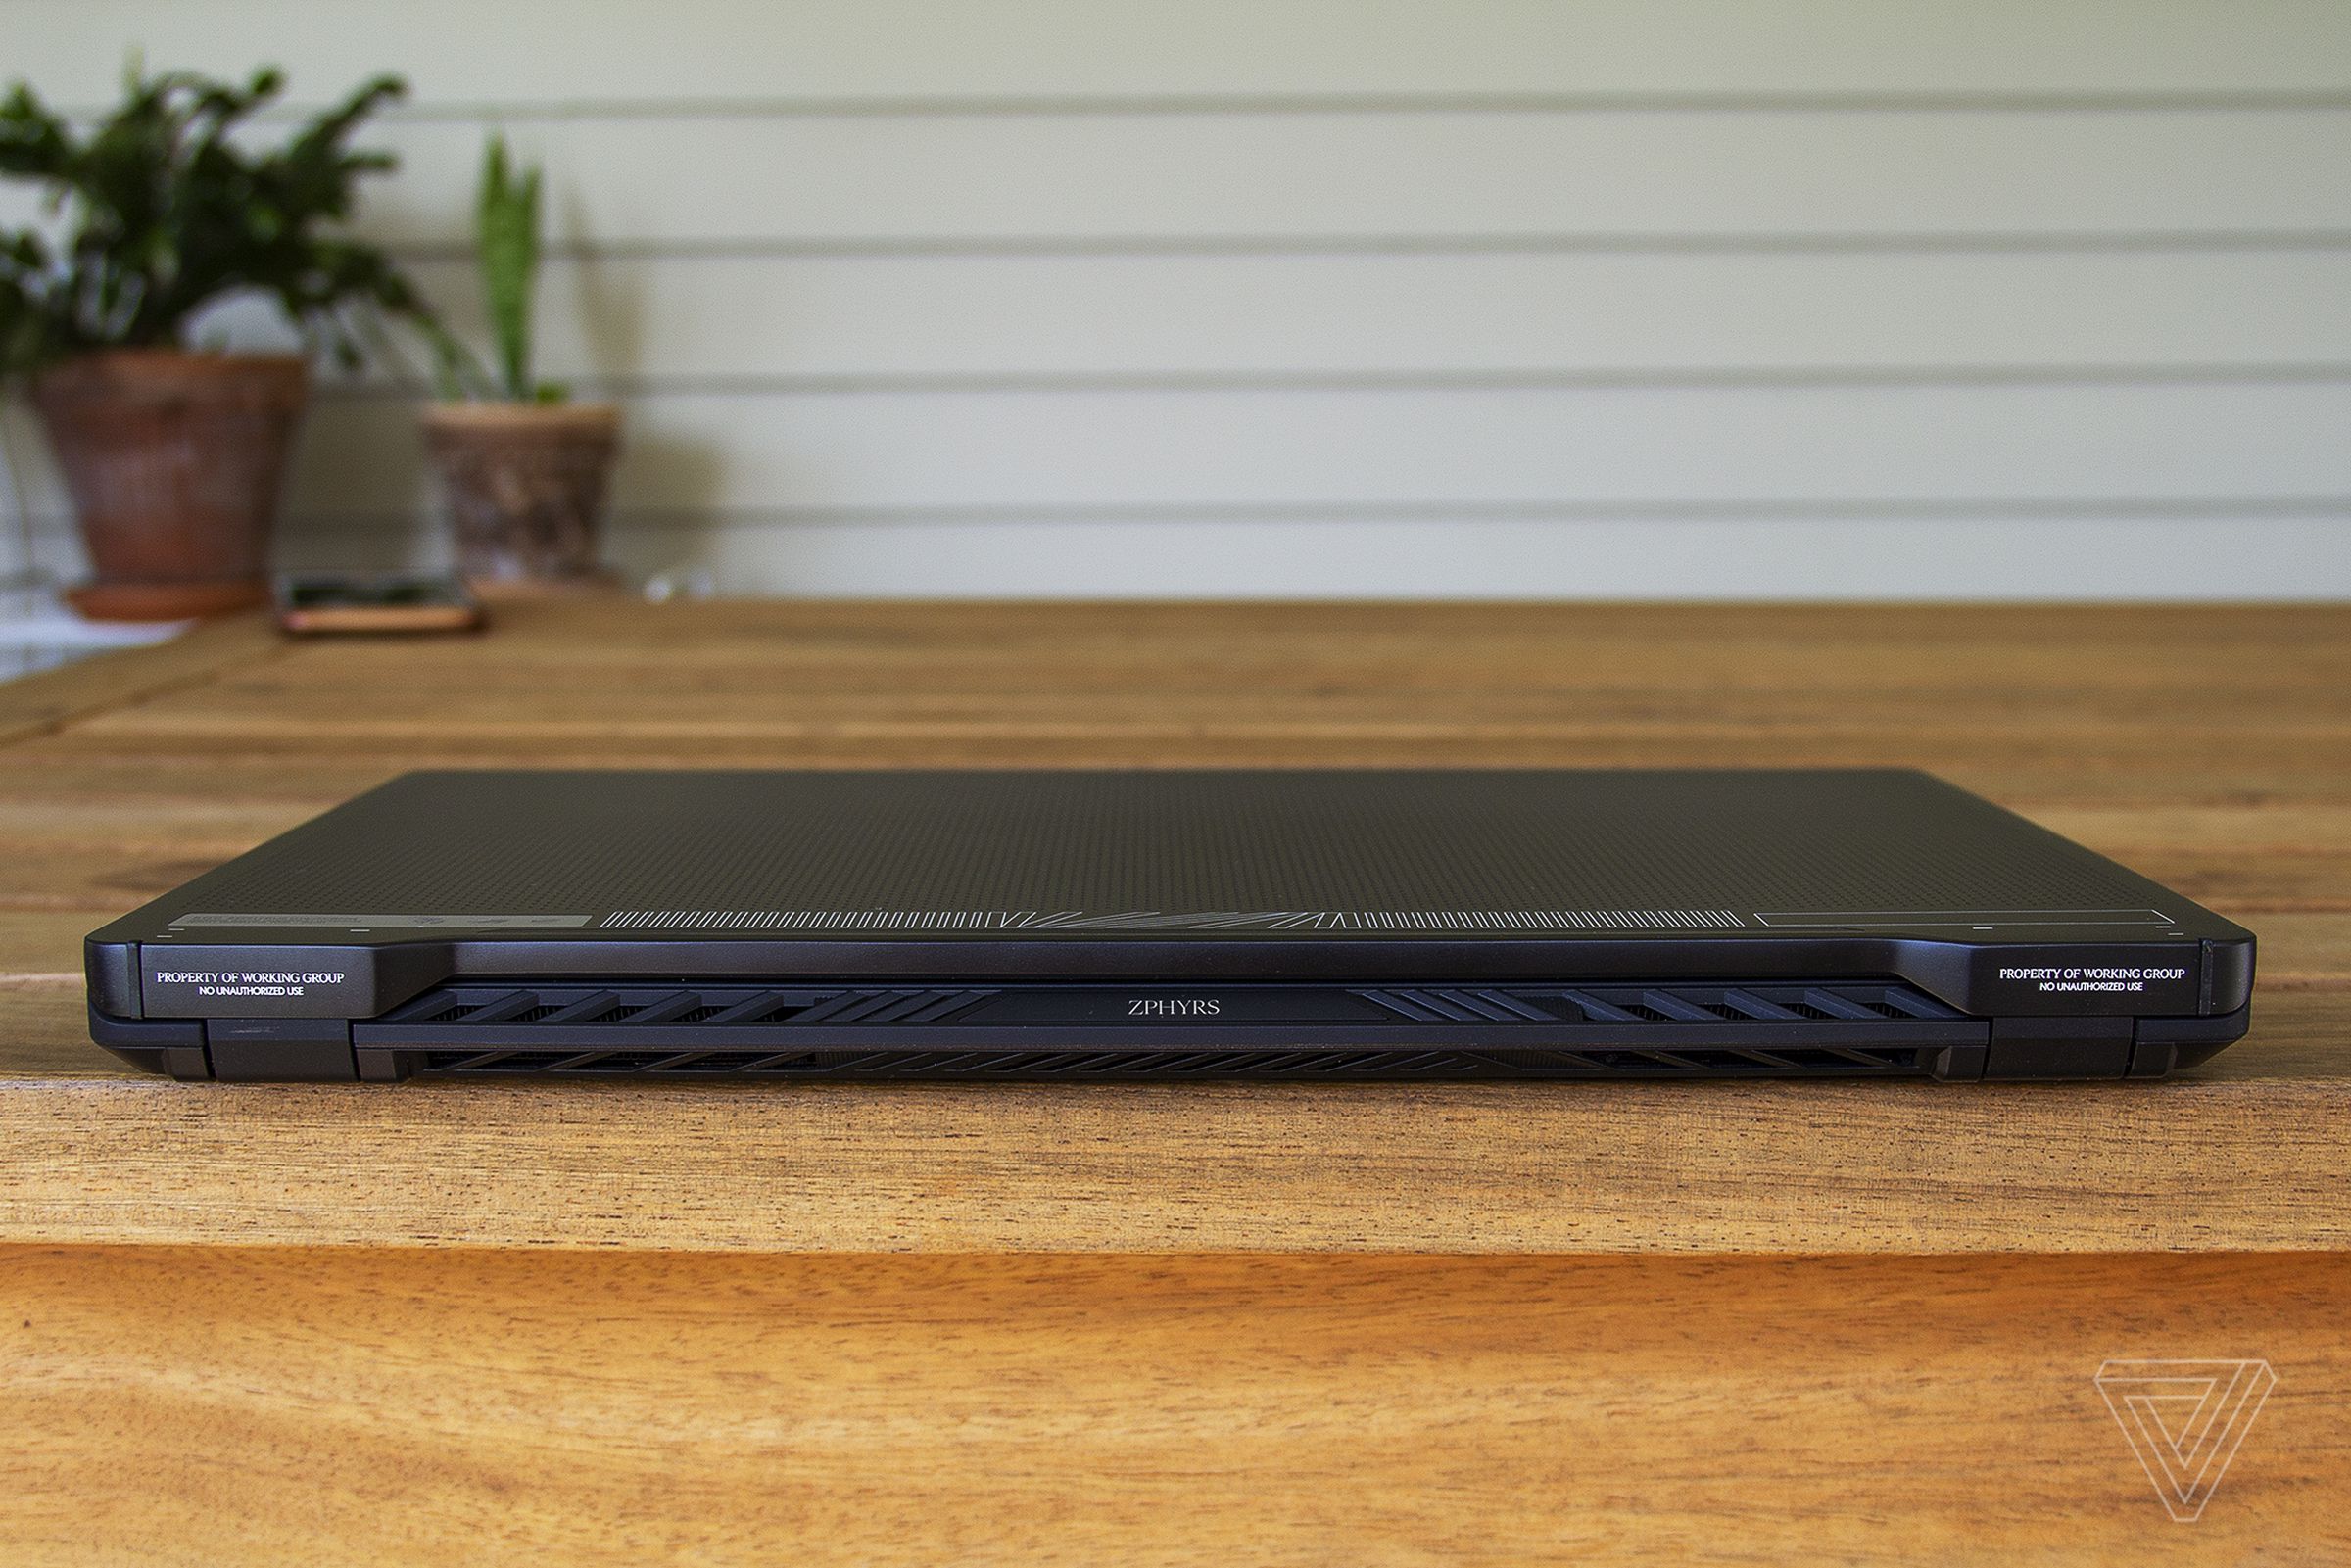 The Asus Zephyrus G14 ACRNM, closed, from the back.